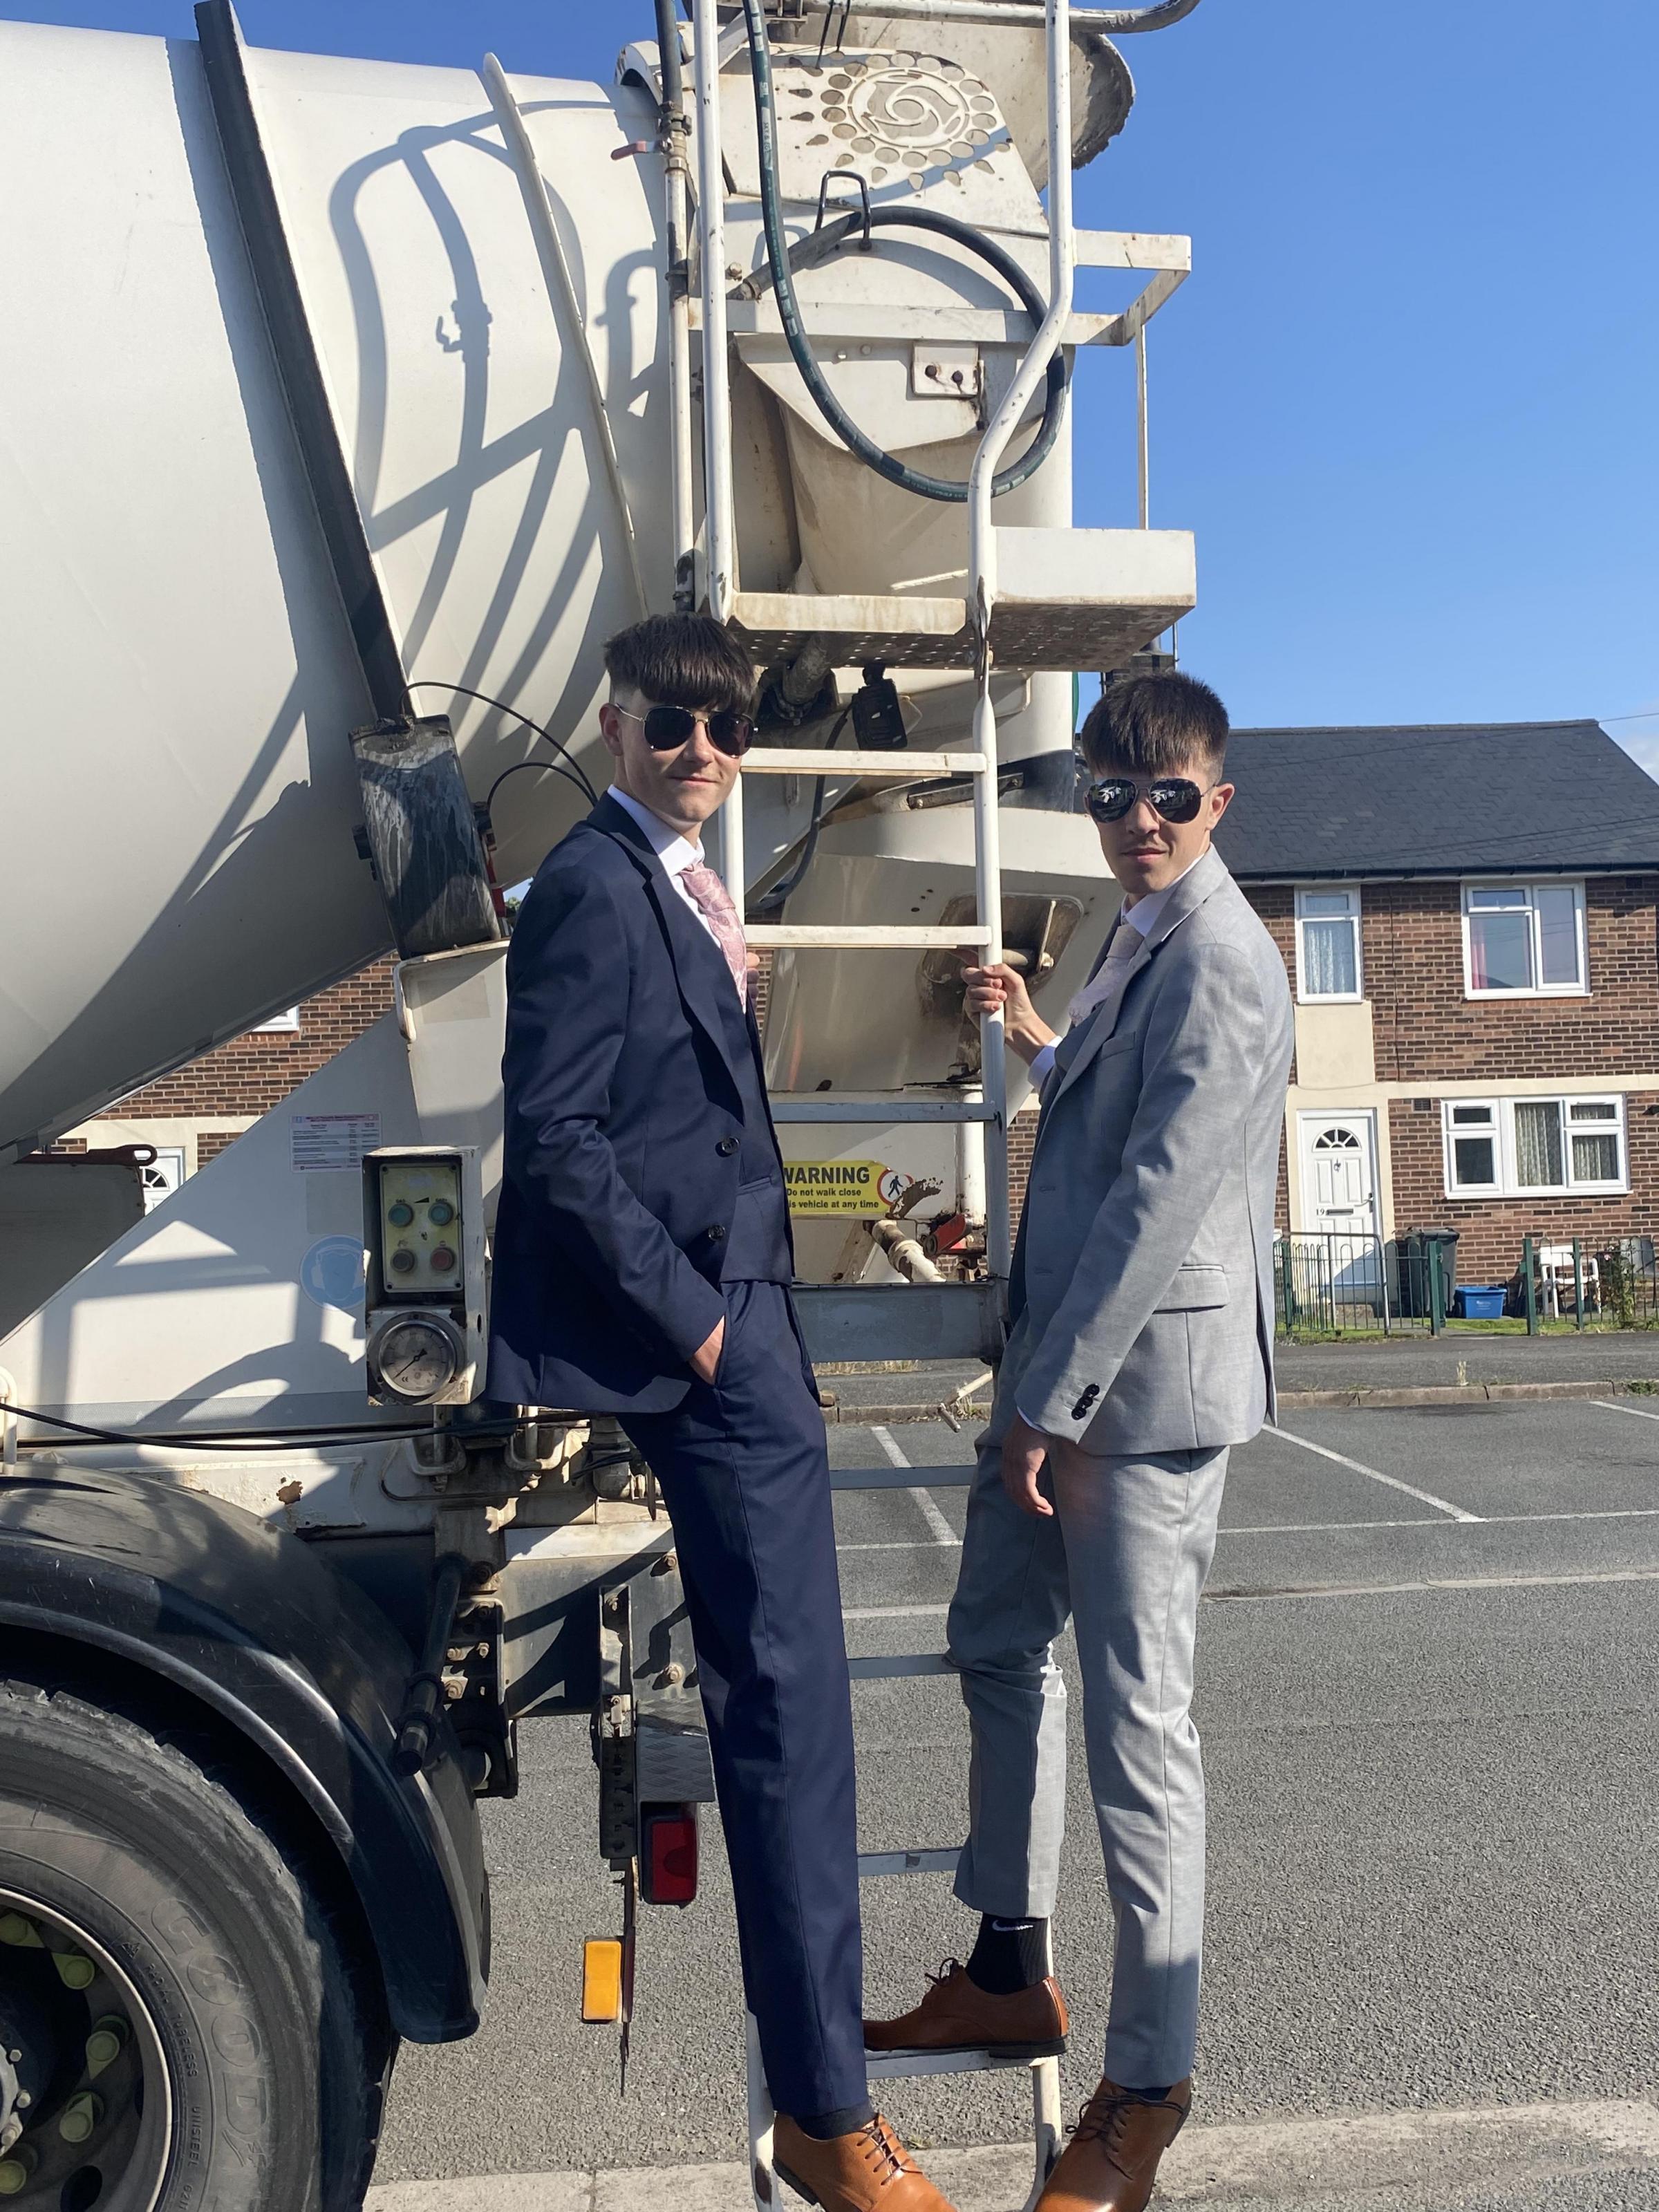 Harley Challinor and Dylan McGee arrived in style in a Dependable concrete mixer for their Hawarden High School prom at Chester Racecourse.